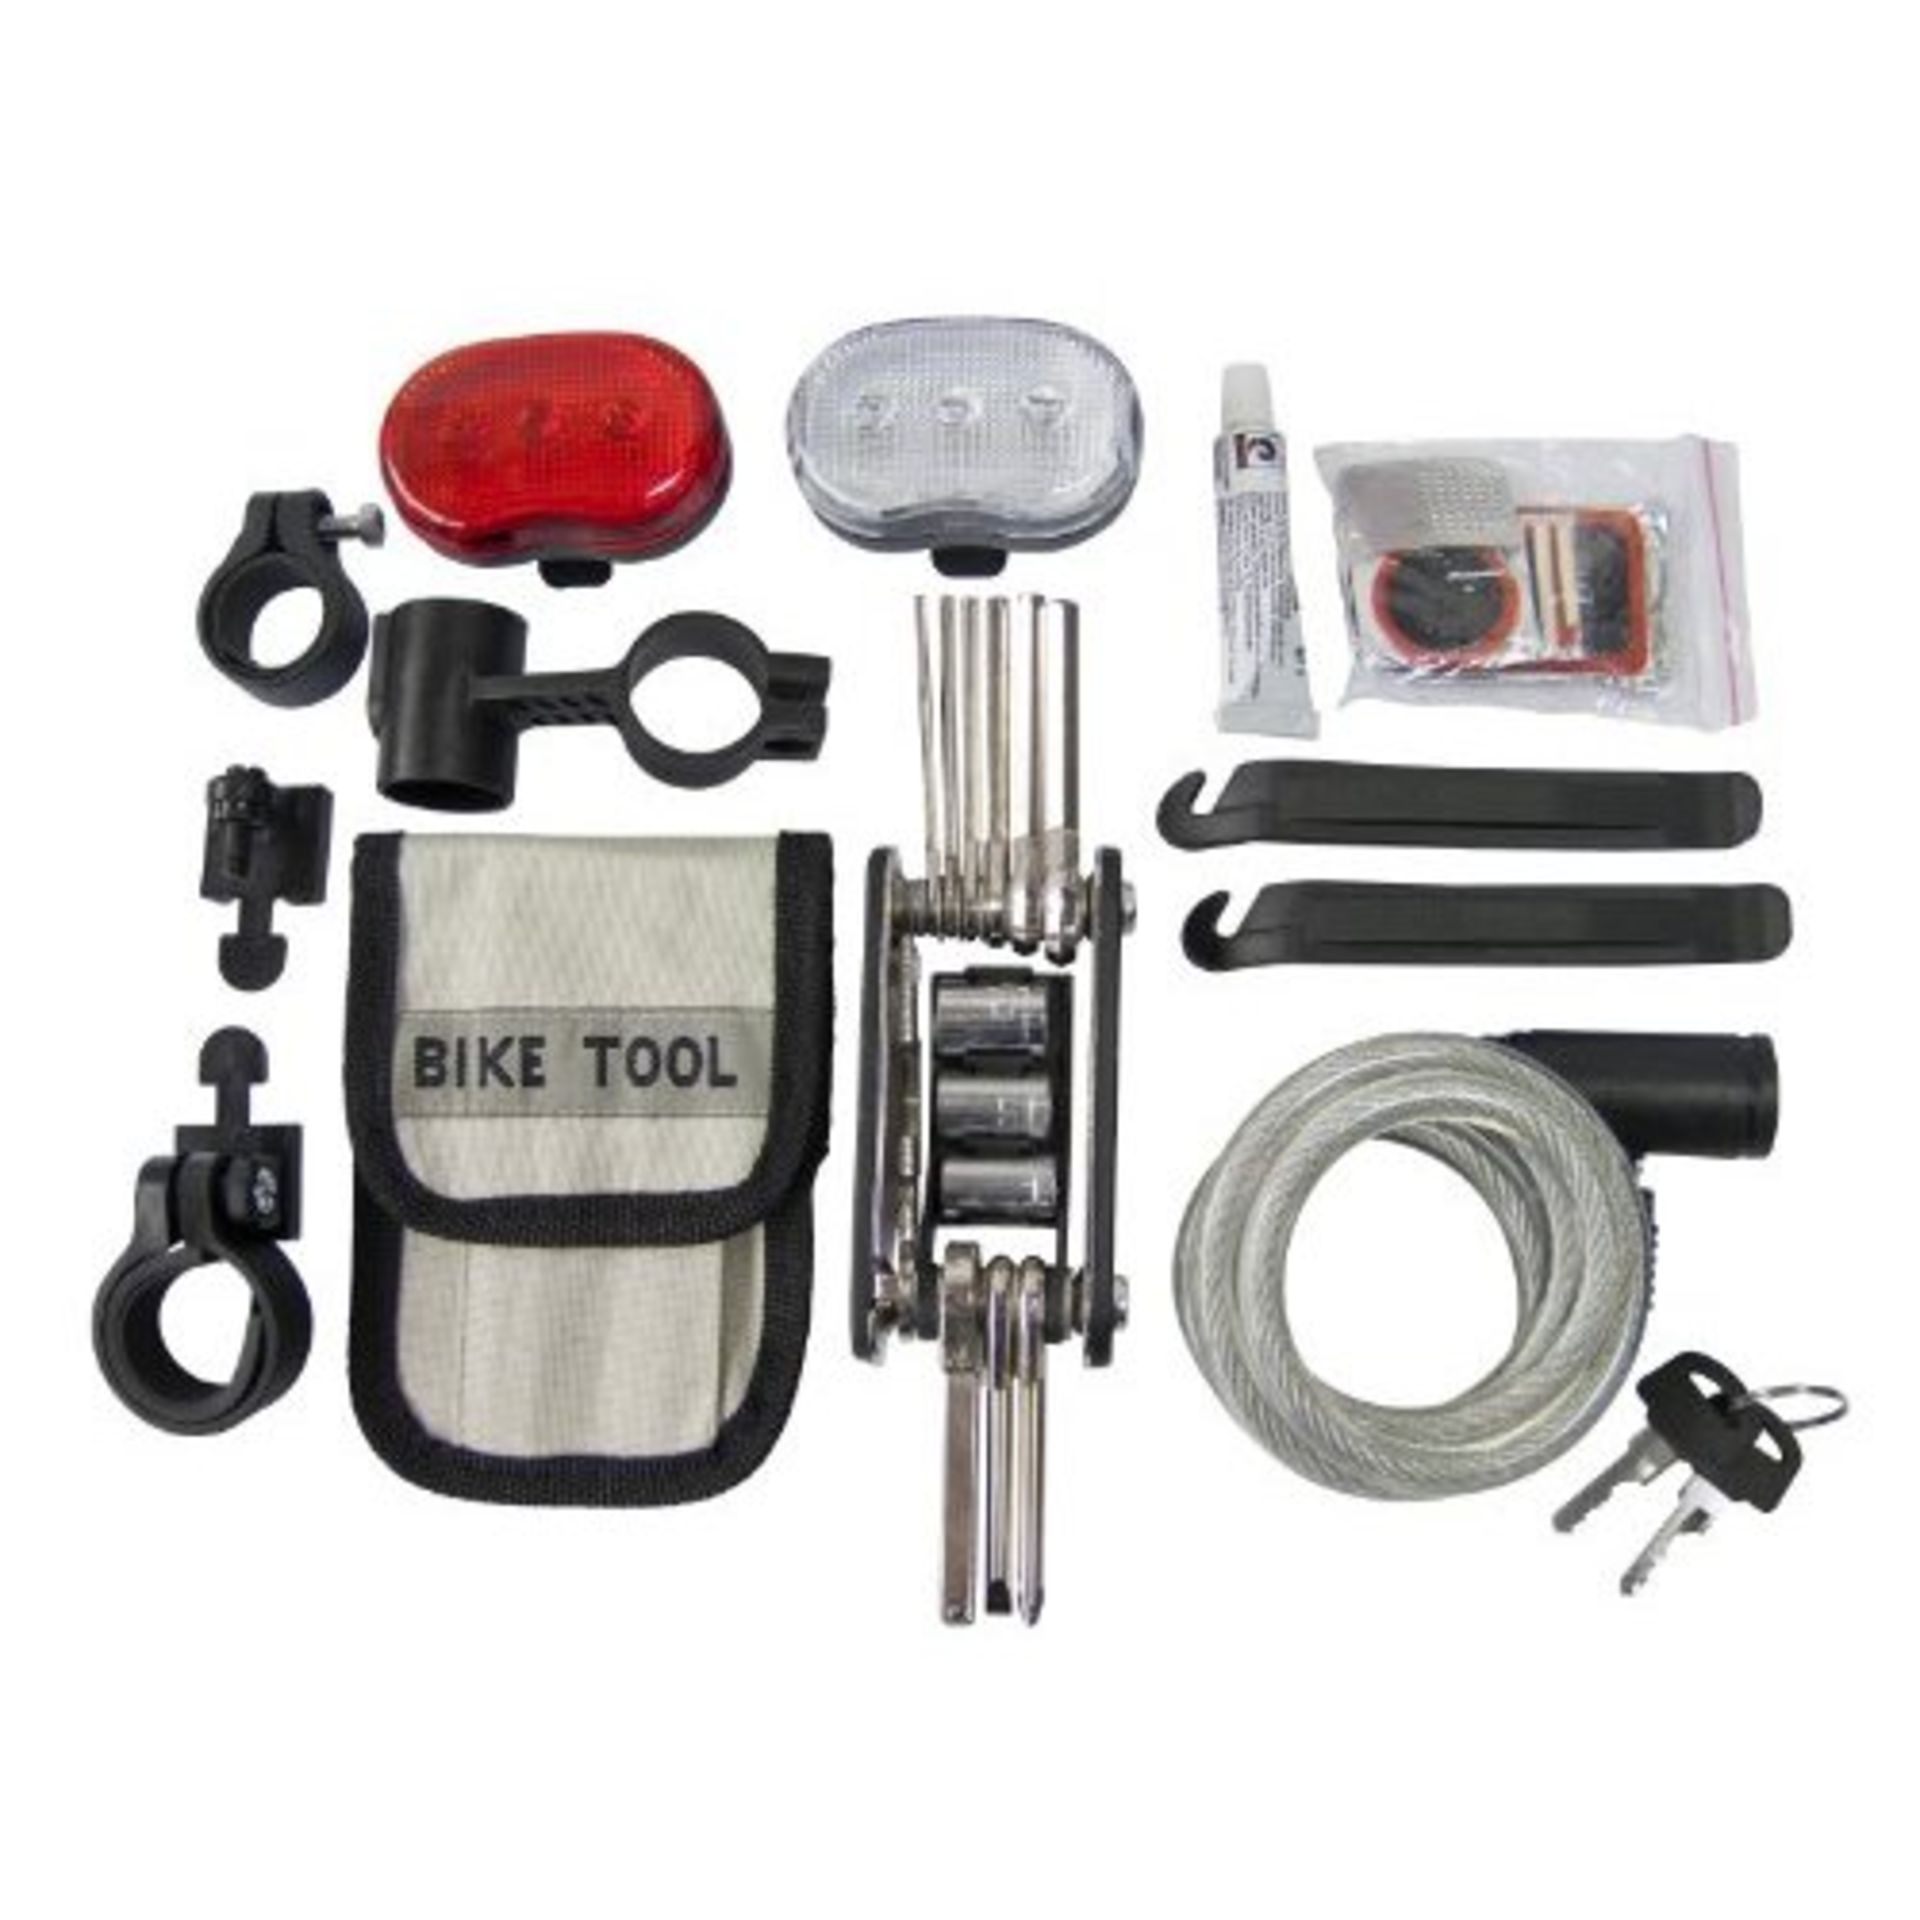 V Brand New Bicycle Accessory Set Includes Multi Tool/Sockets/Lock/Puncture Kit/Front & Rear